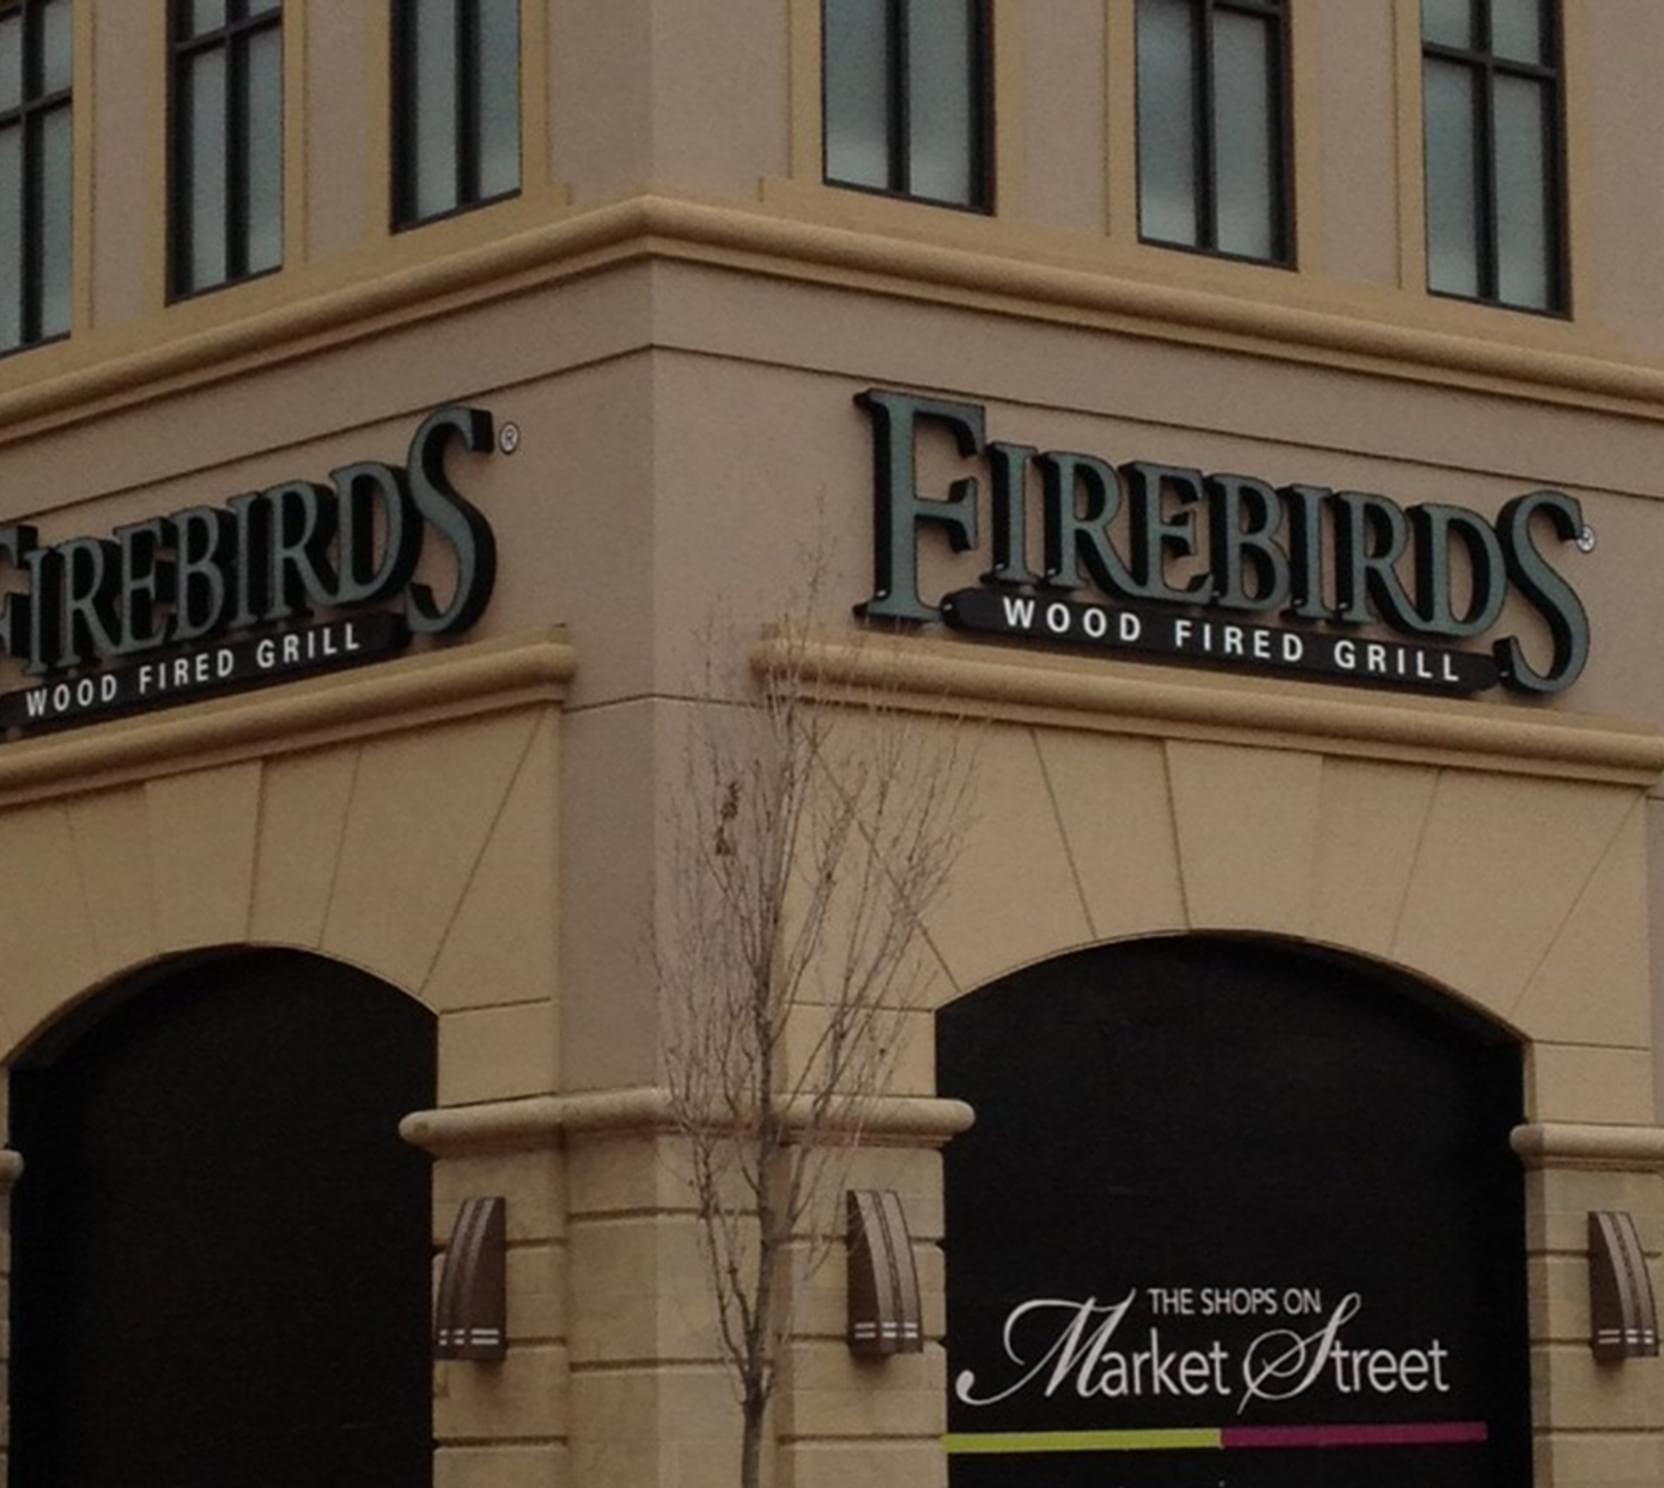 Exterior of the Firebirds Wood Fired Grill in Collegeville, PA